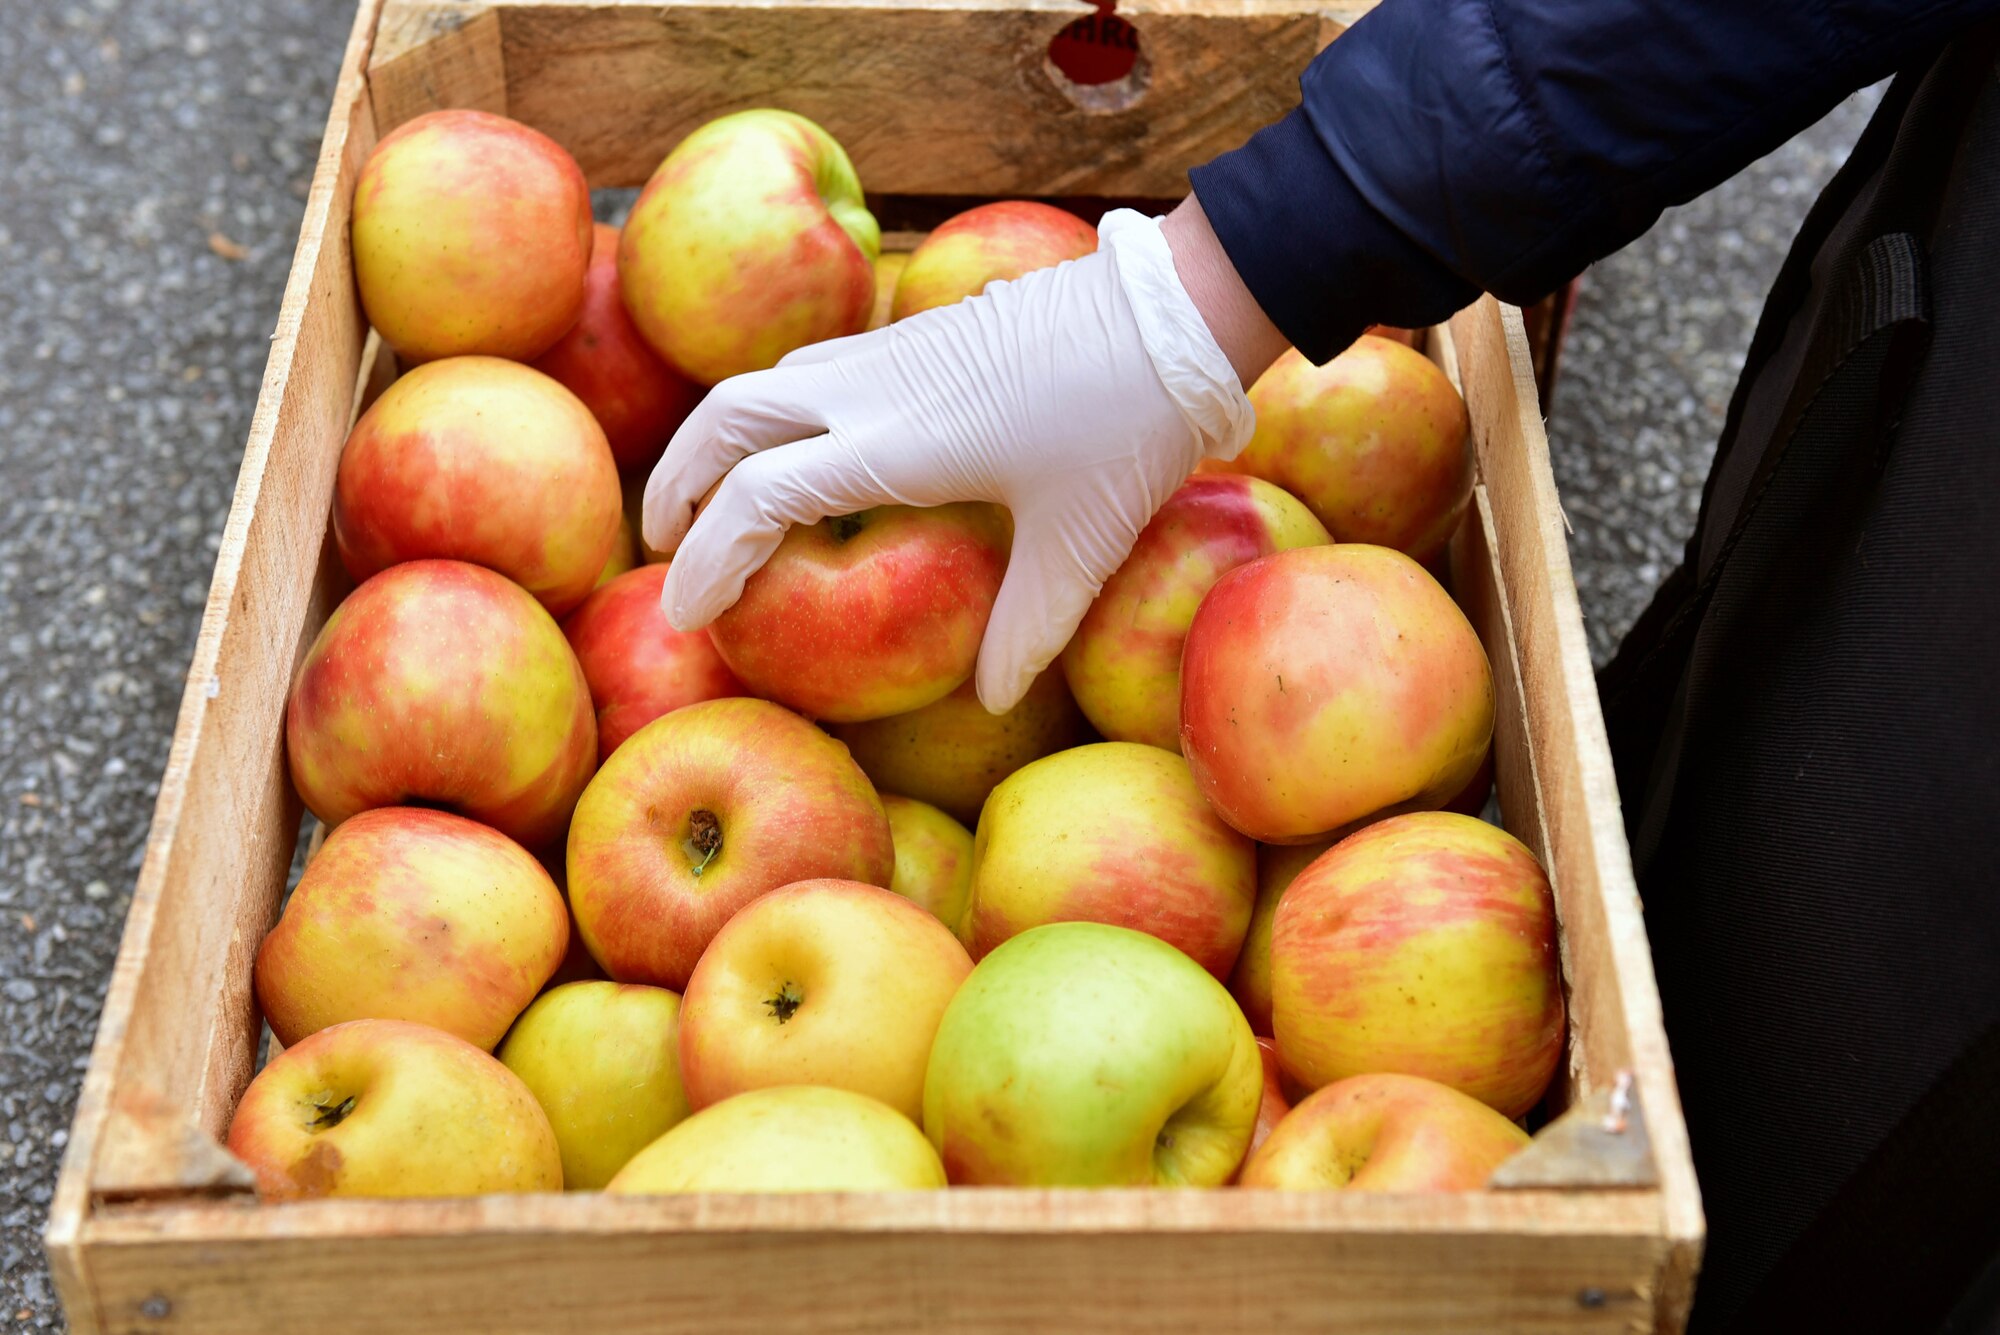 Apples were one of the items offered during a bi-monthly produce run at Seymour Johnson Air Force Base, N.C. on March 22, 2020.